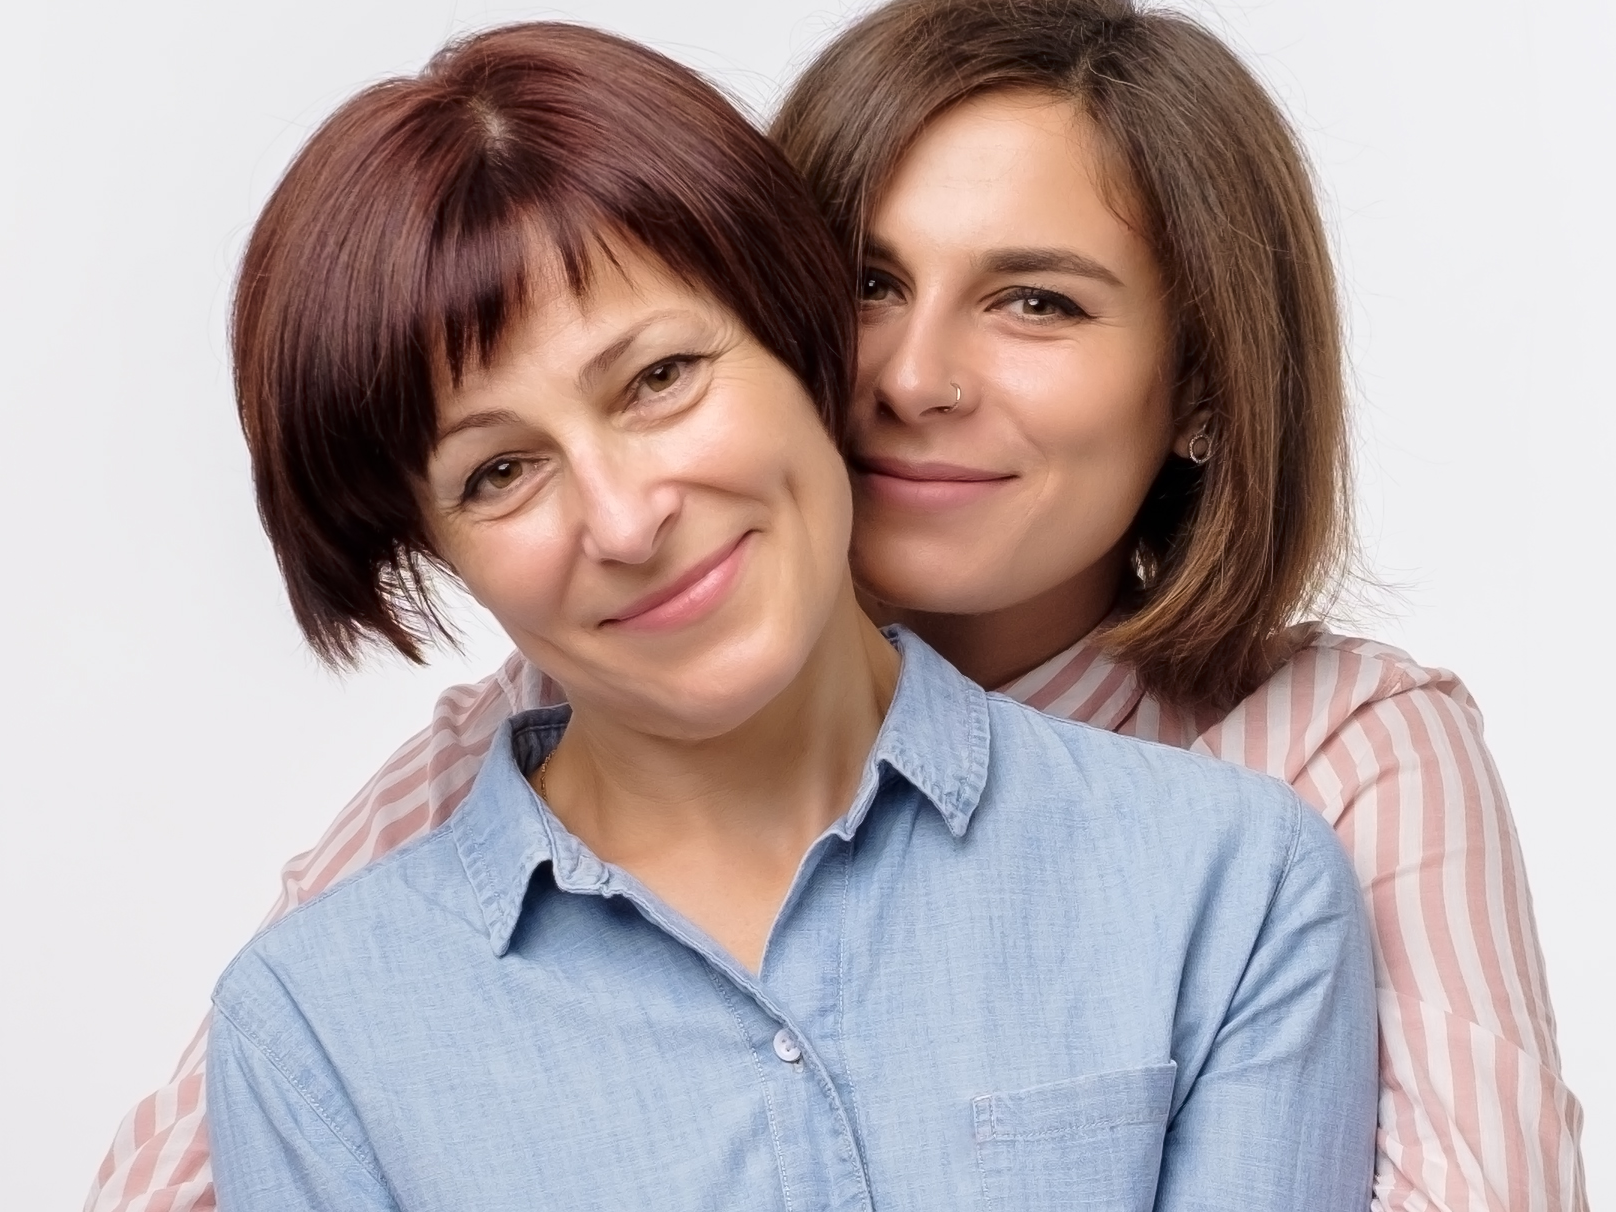 12 Things to Do With Your Mom When The Miles Separate You